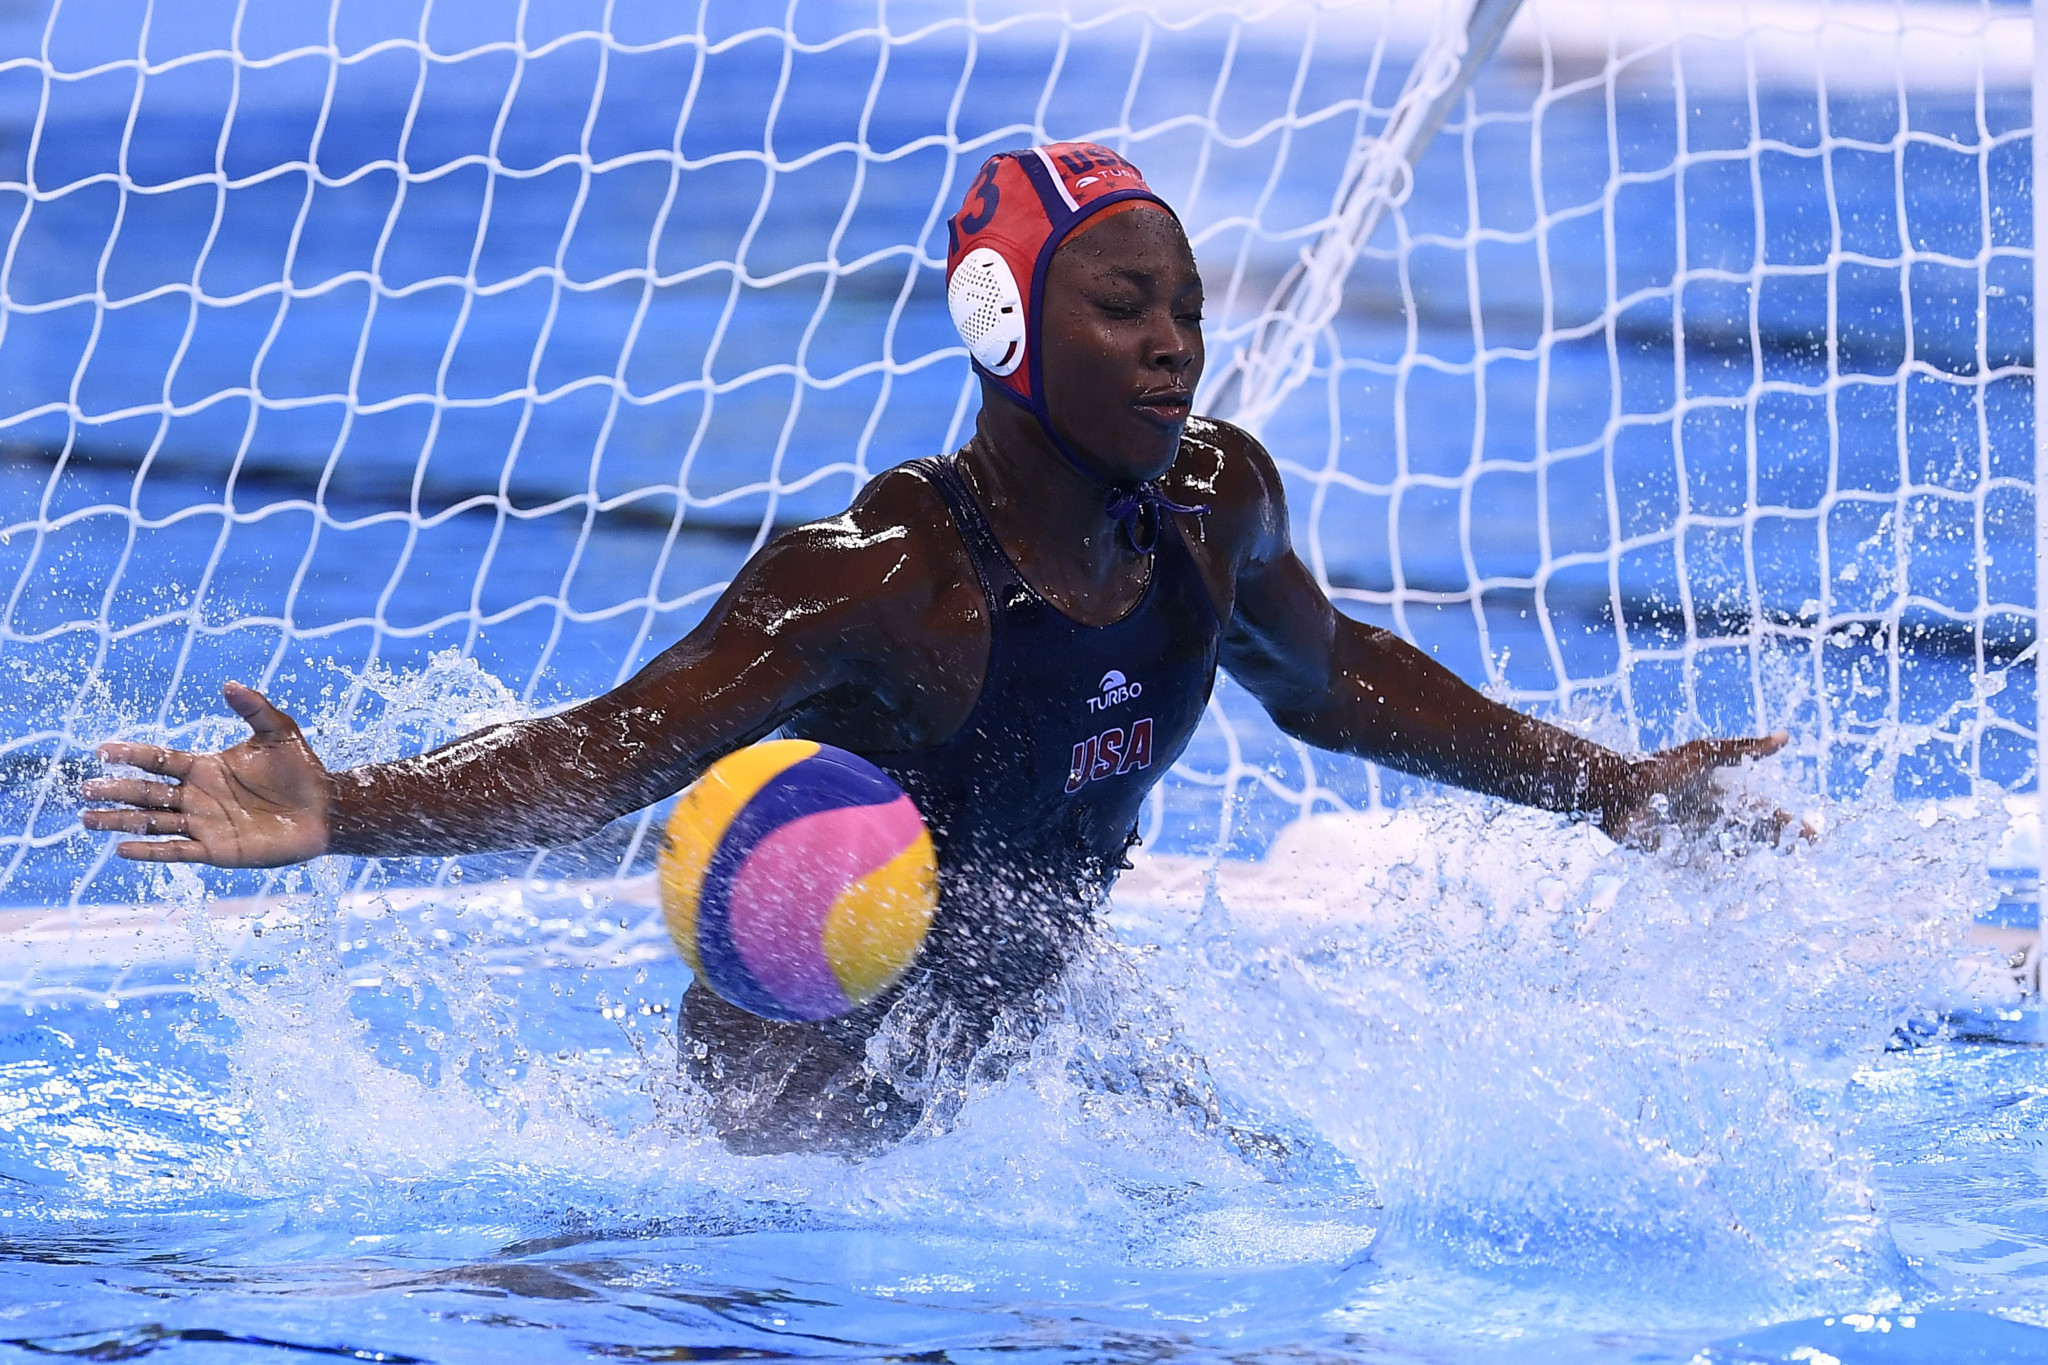 Reigning champions United States looking powerful for FINA Women's Water Polo World League Super Final - but don't rule out Dutch challenge